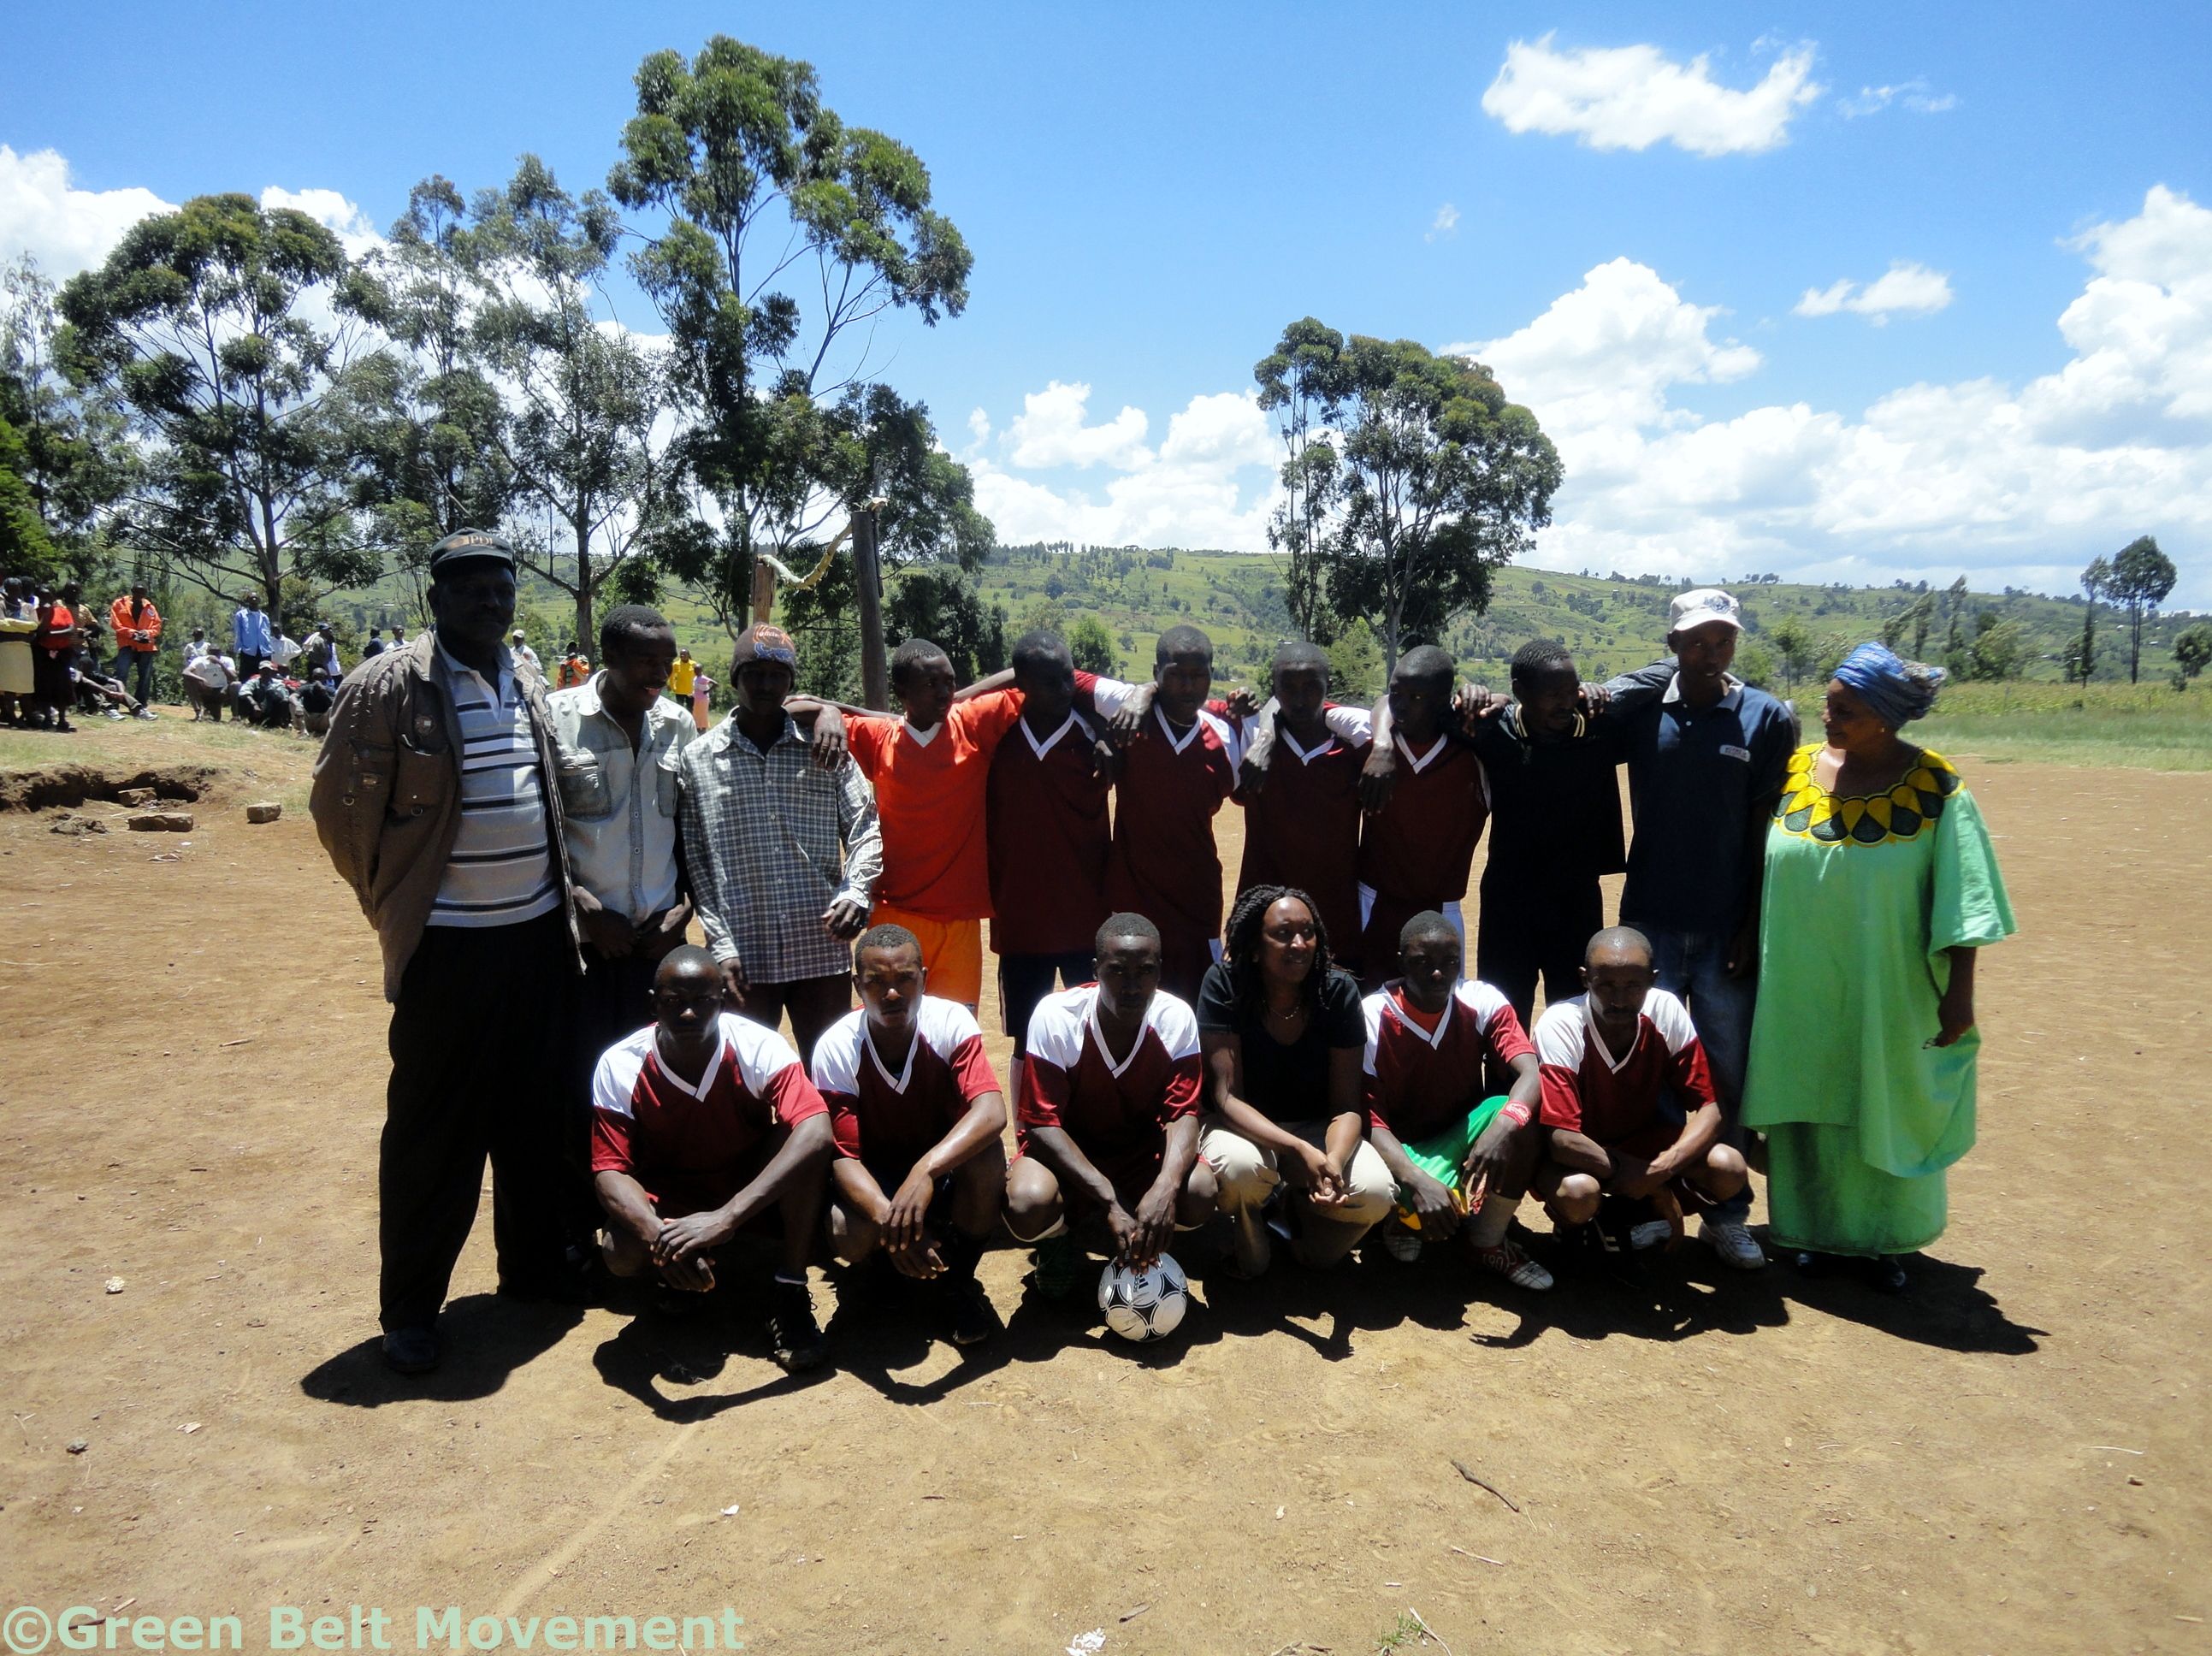 GBM Staff and Board Member with Youth from Kamungei Football club before the match